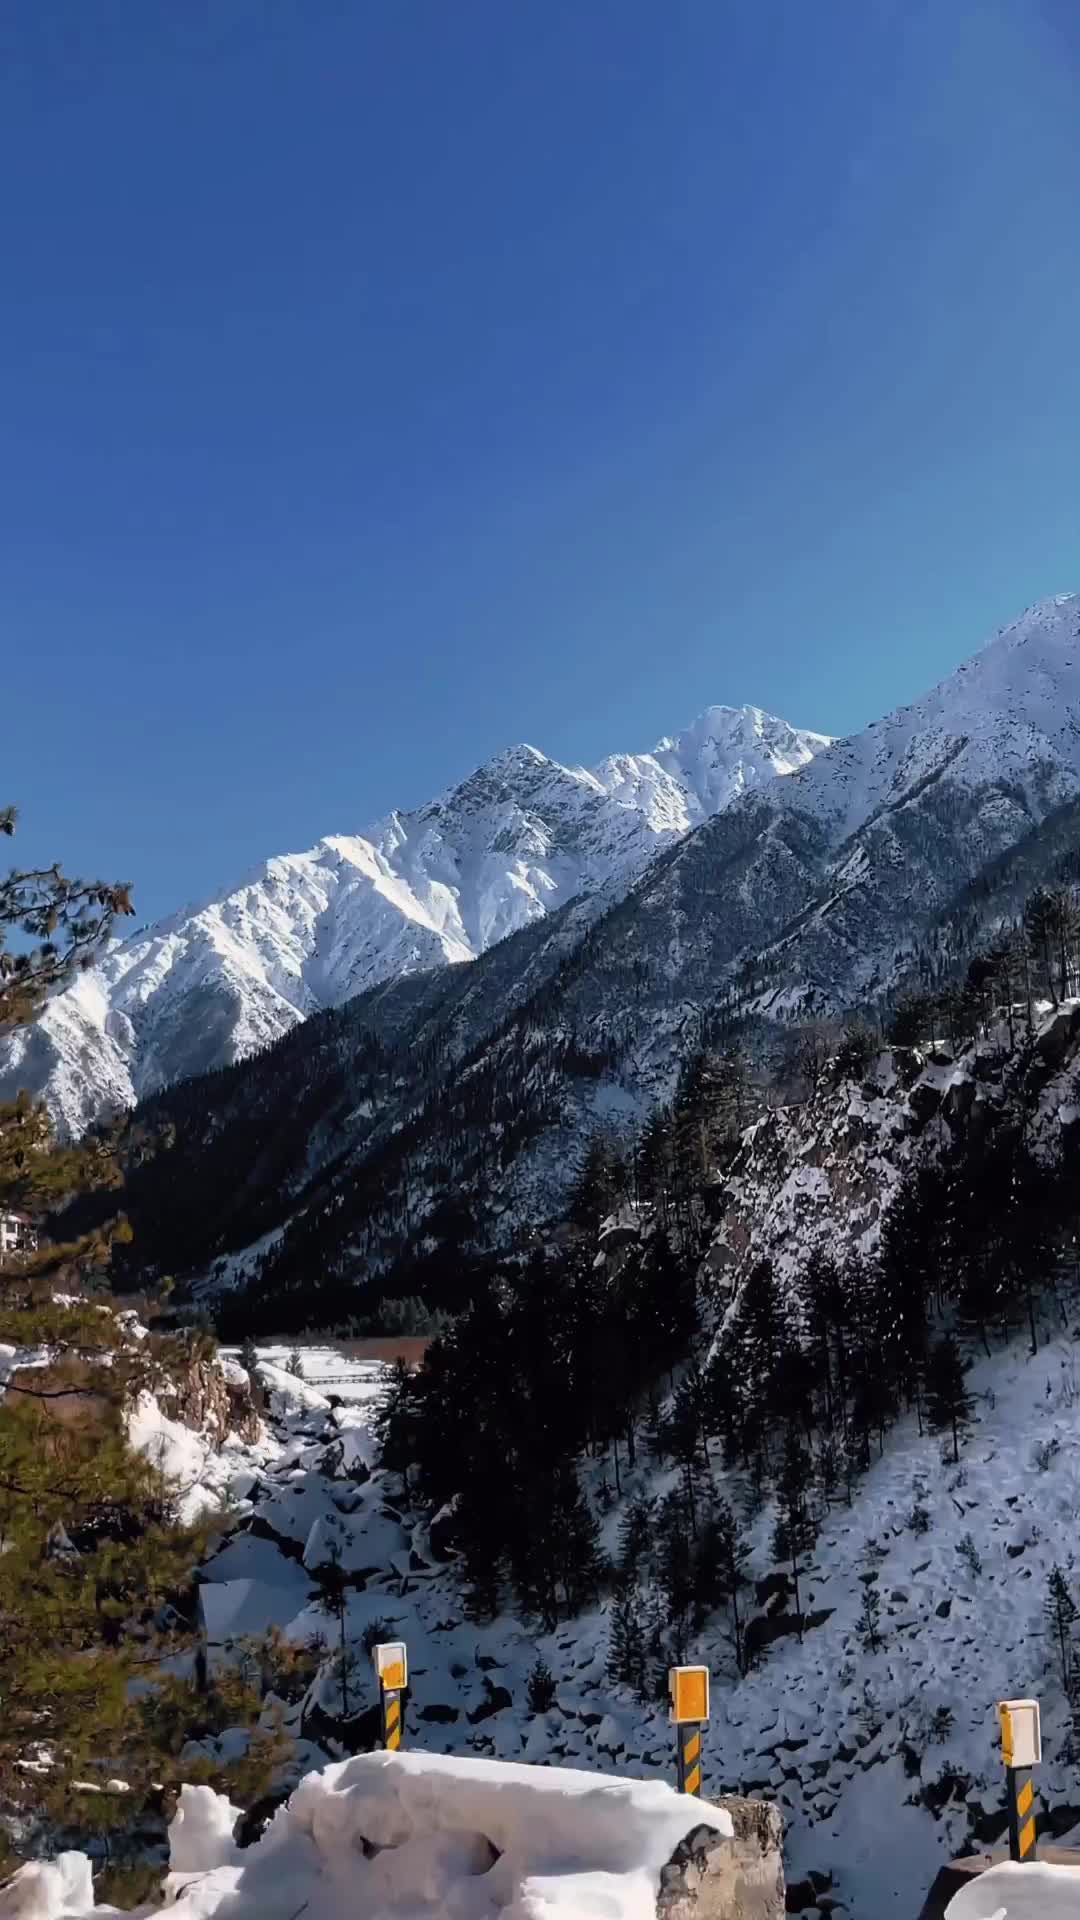 Discover Snowy Chitkul: A Winter Wonderland in Himachal